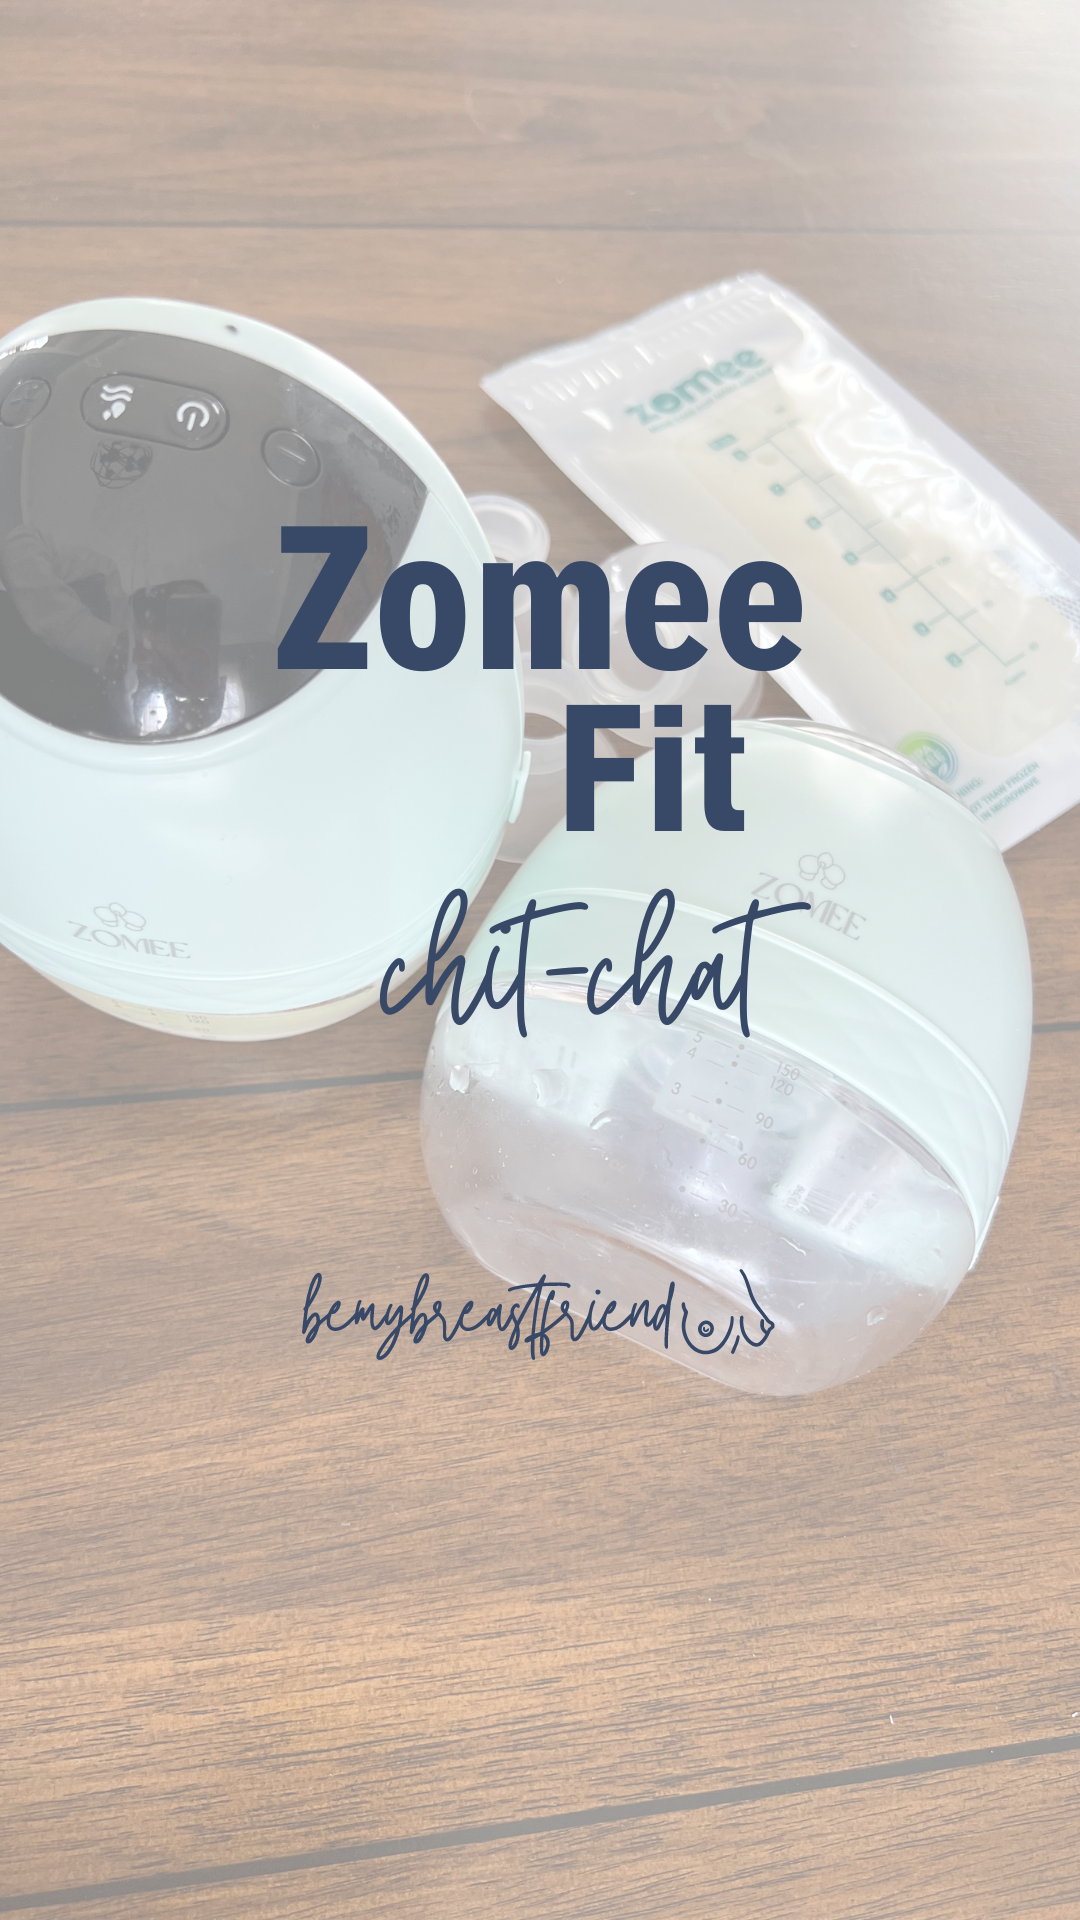 Zomee Fit Chit-Chat